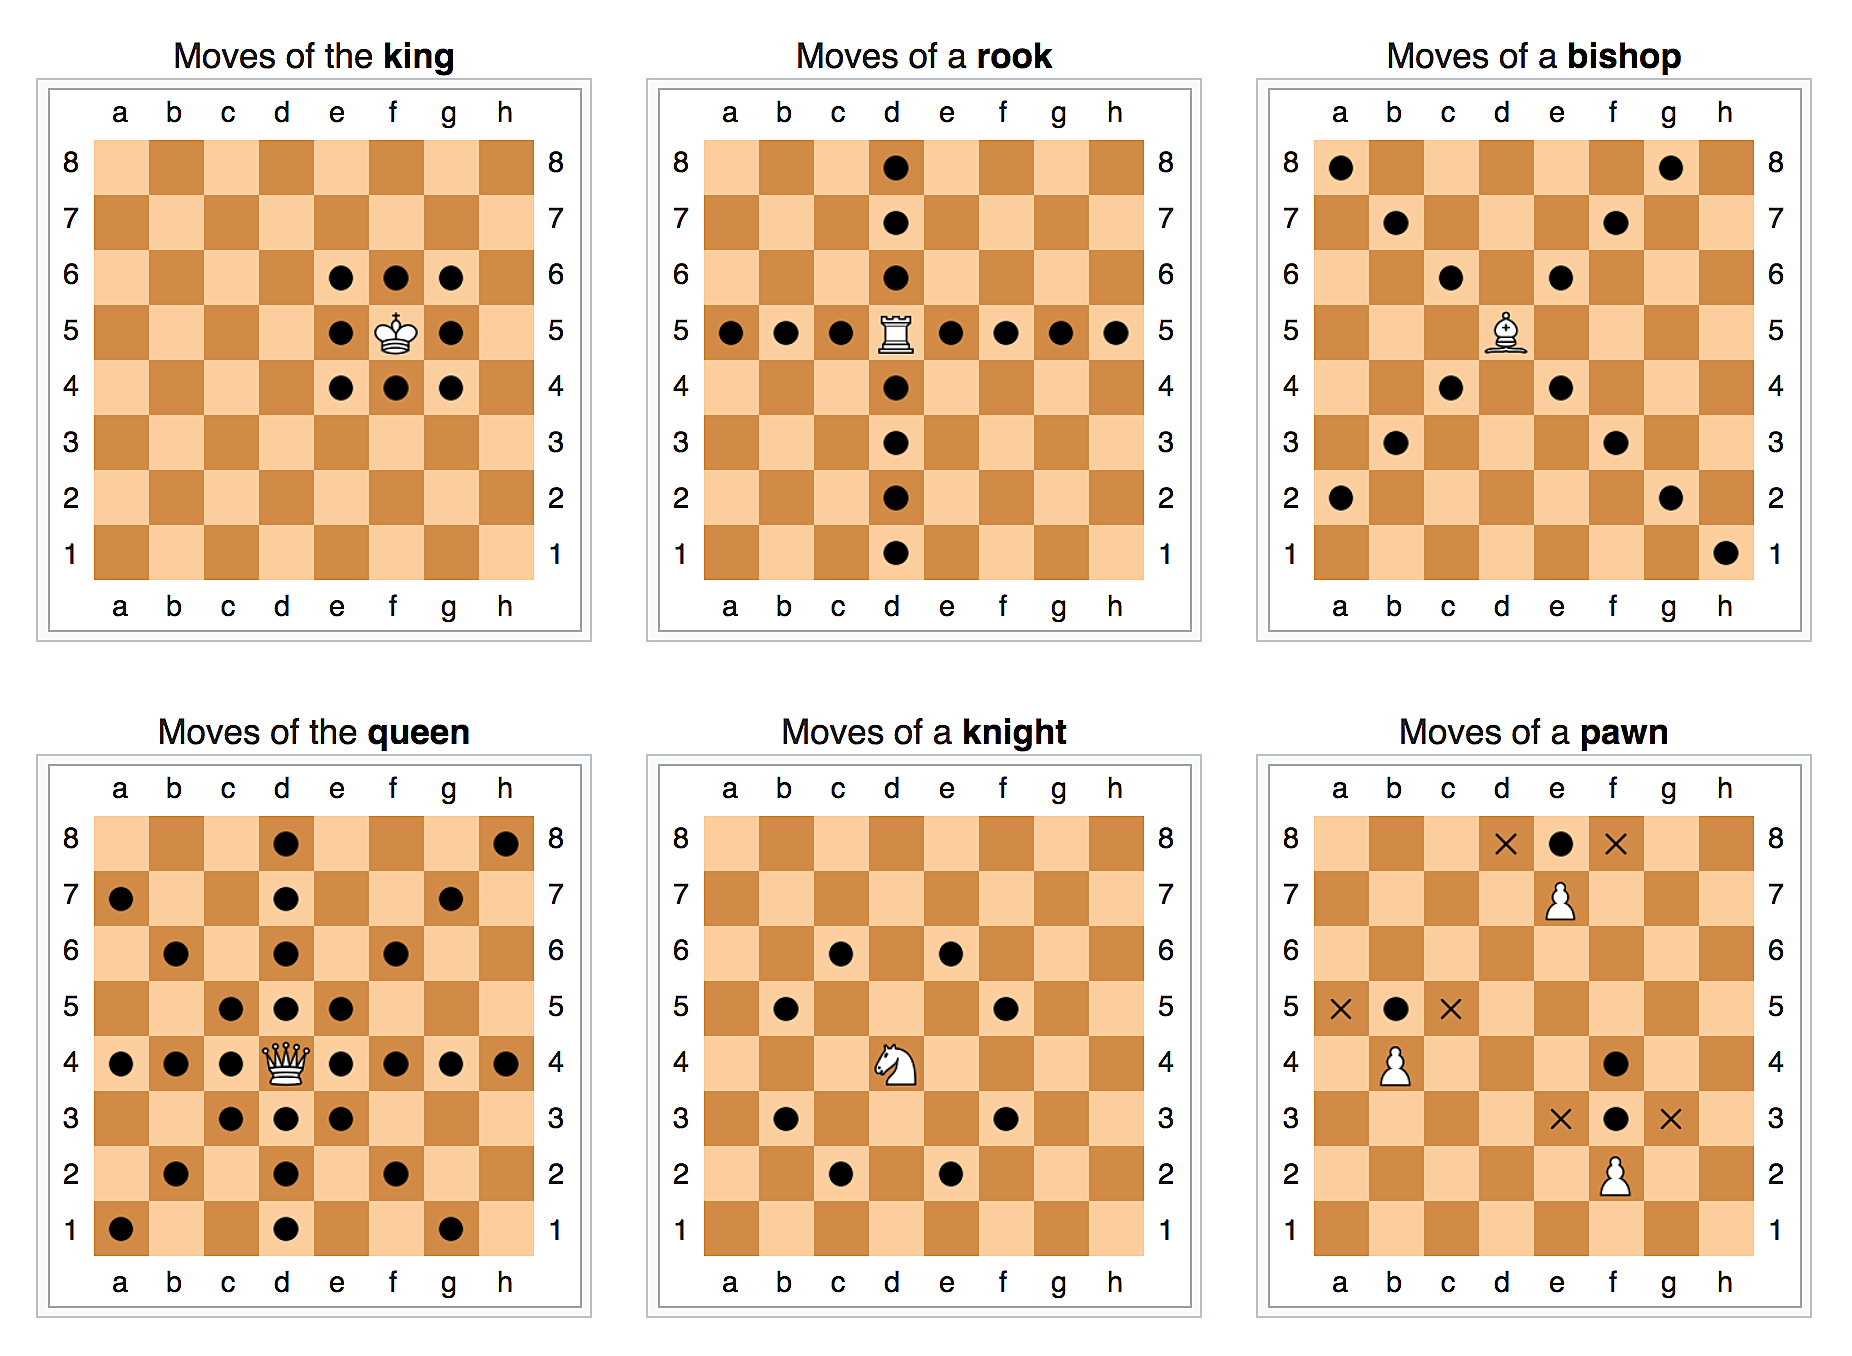 Chess Strategies for Beginners –